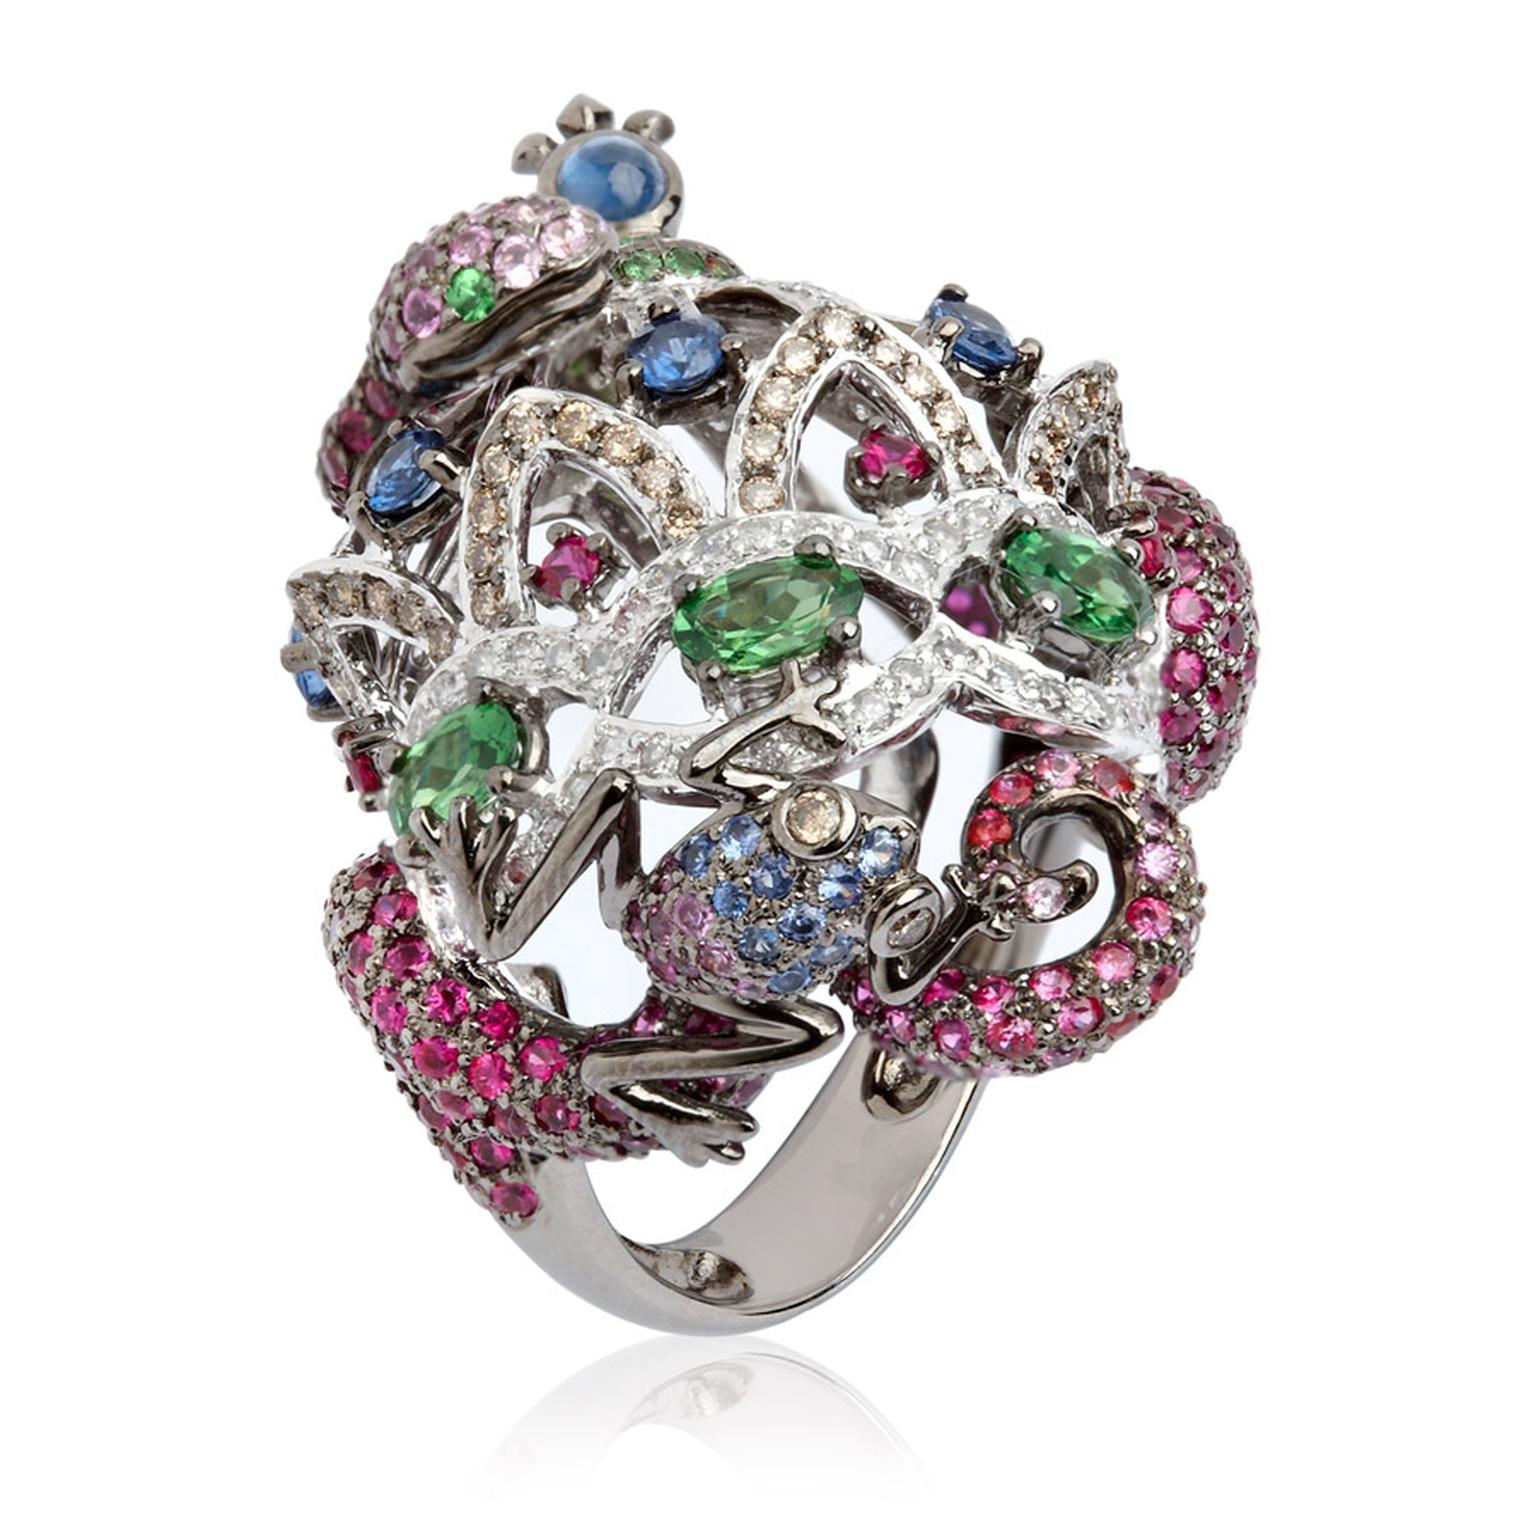 Wendy-Yue-Fantasie--Jubilee-18ct-white-gold,-diamond,-sapphire,-ruby-and-garnet-Serpent-ring-by-Wendy-Yue-for-Annoushka_03.jpg